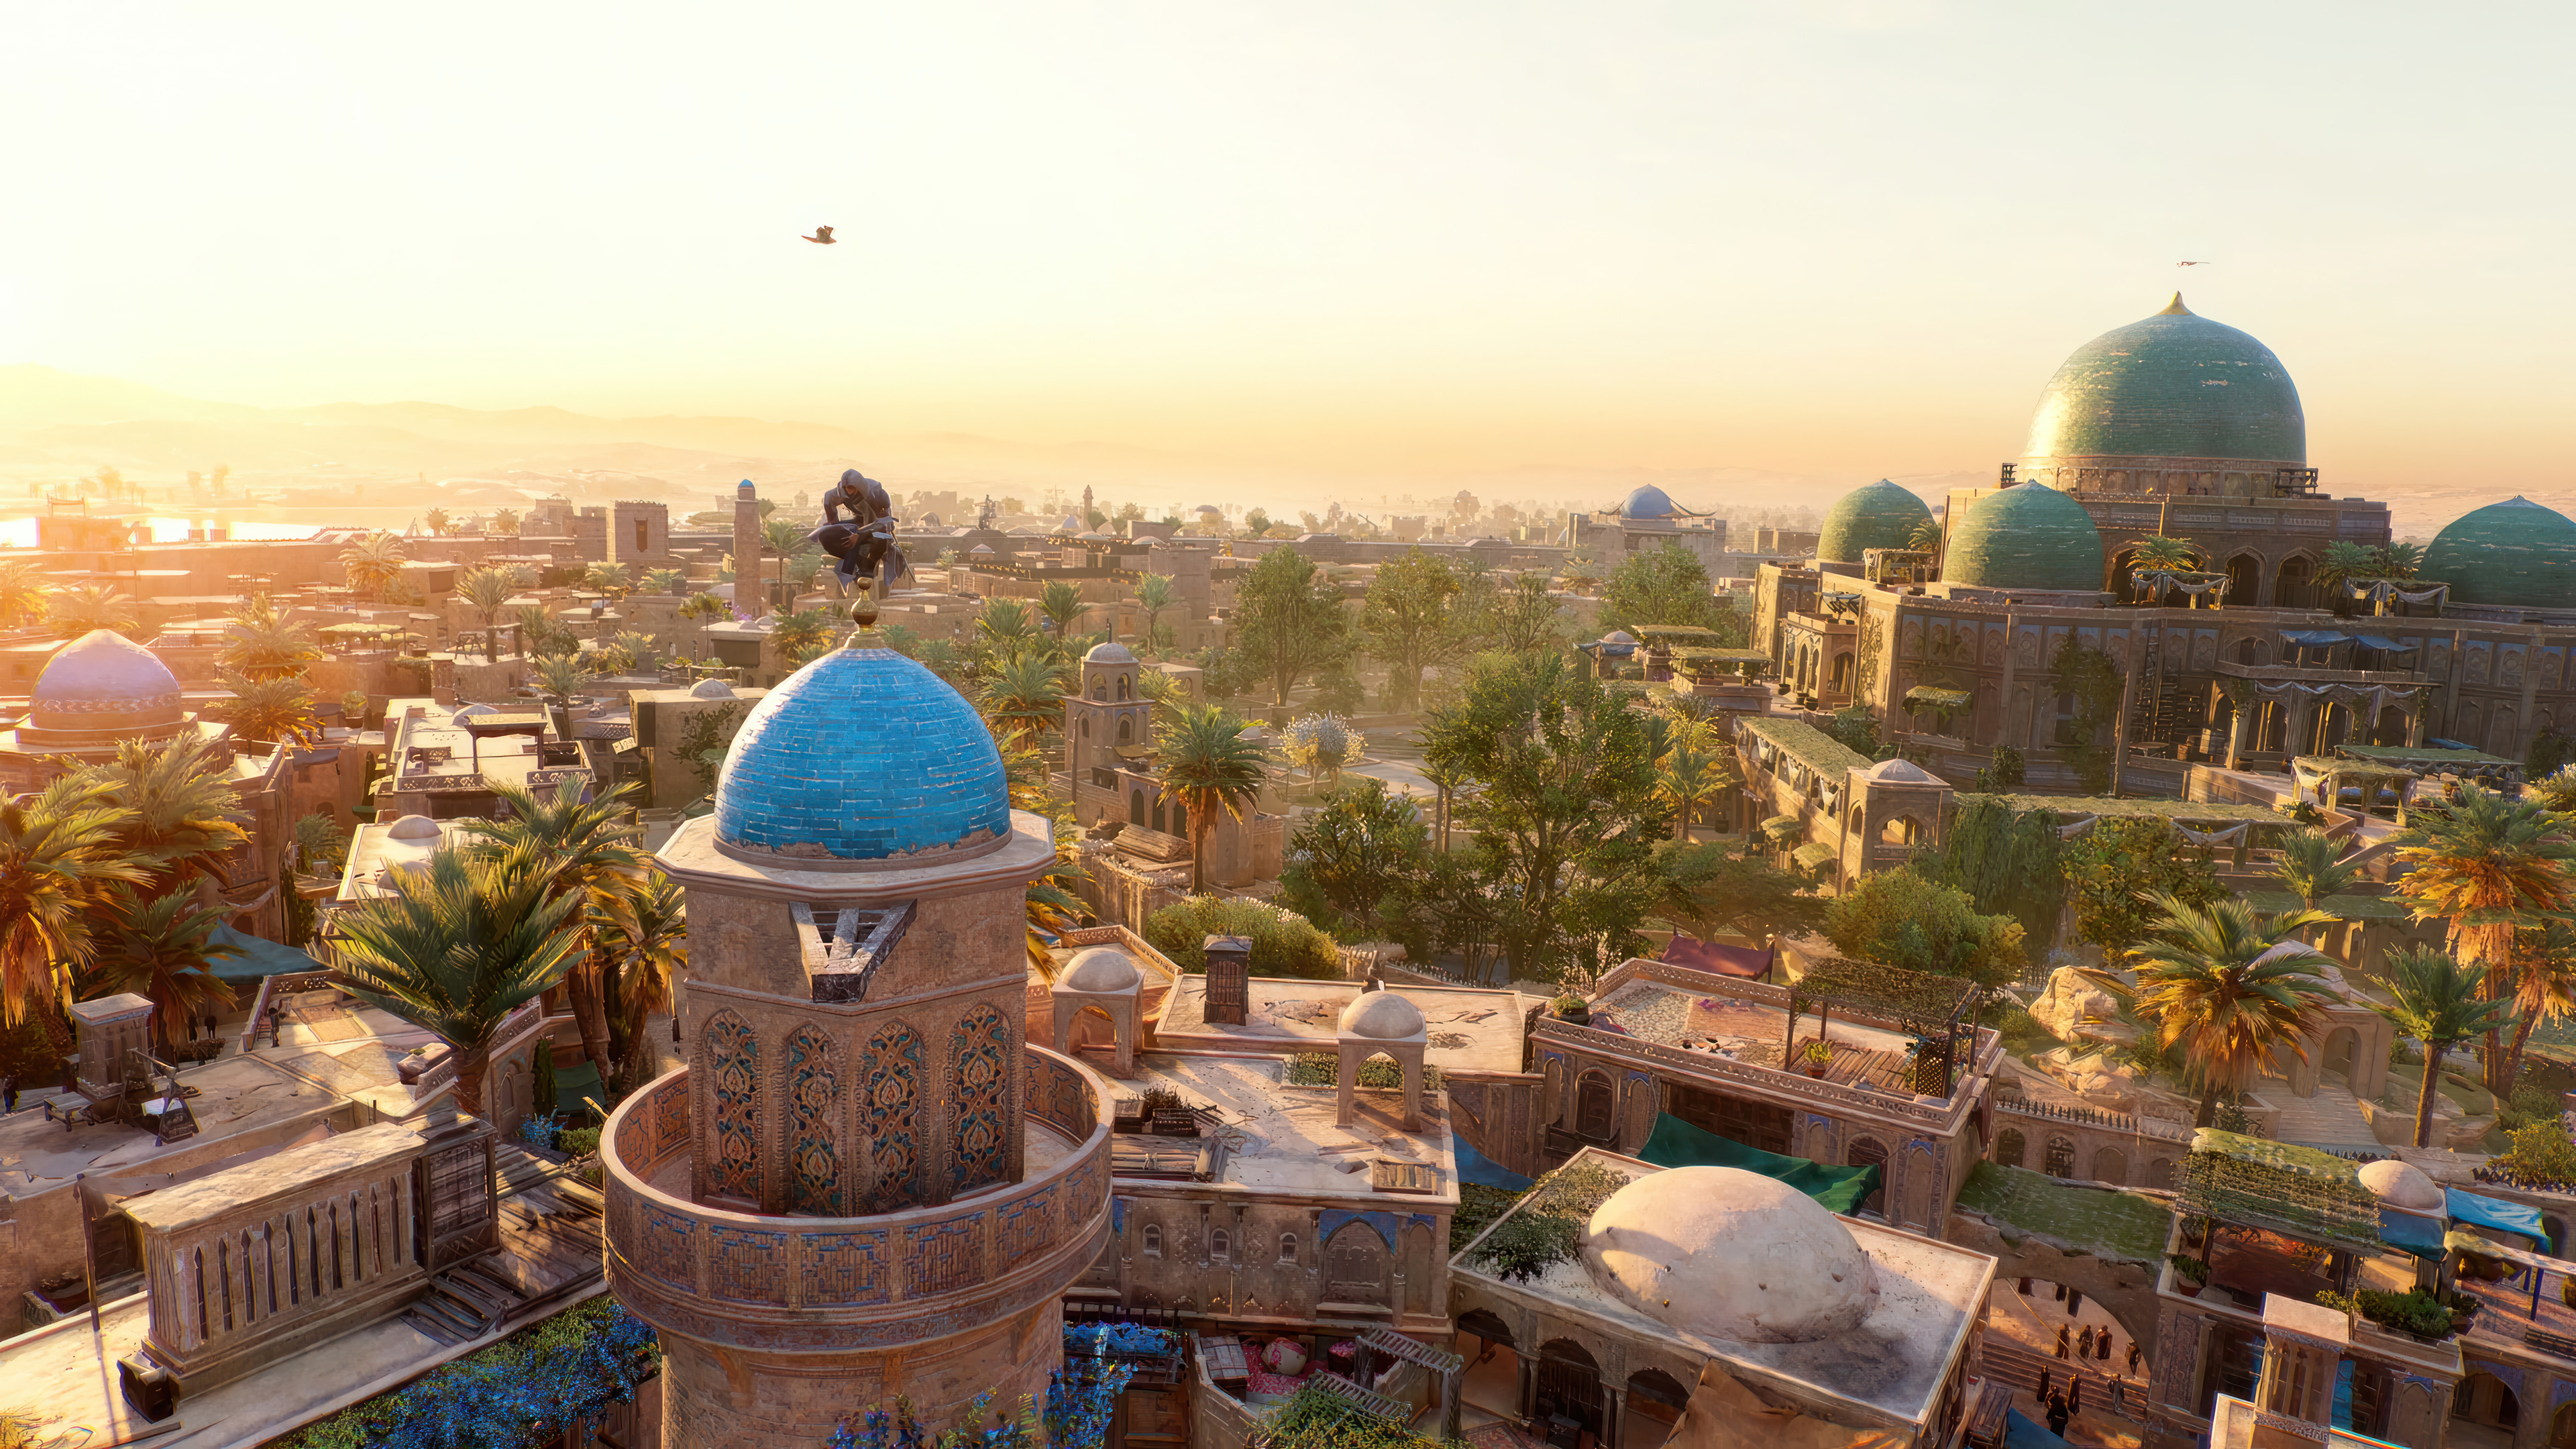 Assassin's Creed Mirage HD desktop wallpaper featuring a vibrant scene over ancient city rooftops with iconic architecture under a warm sunset.